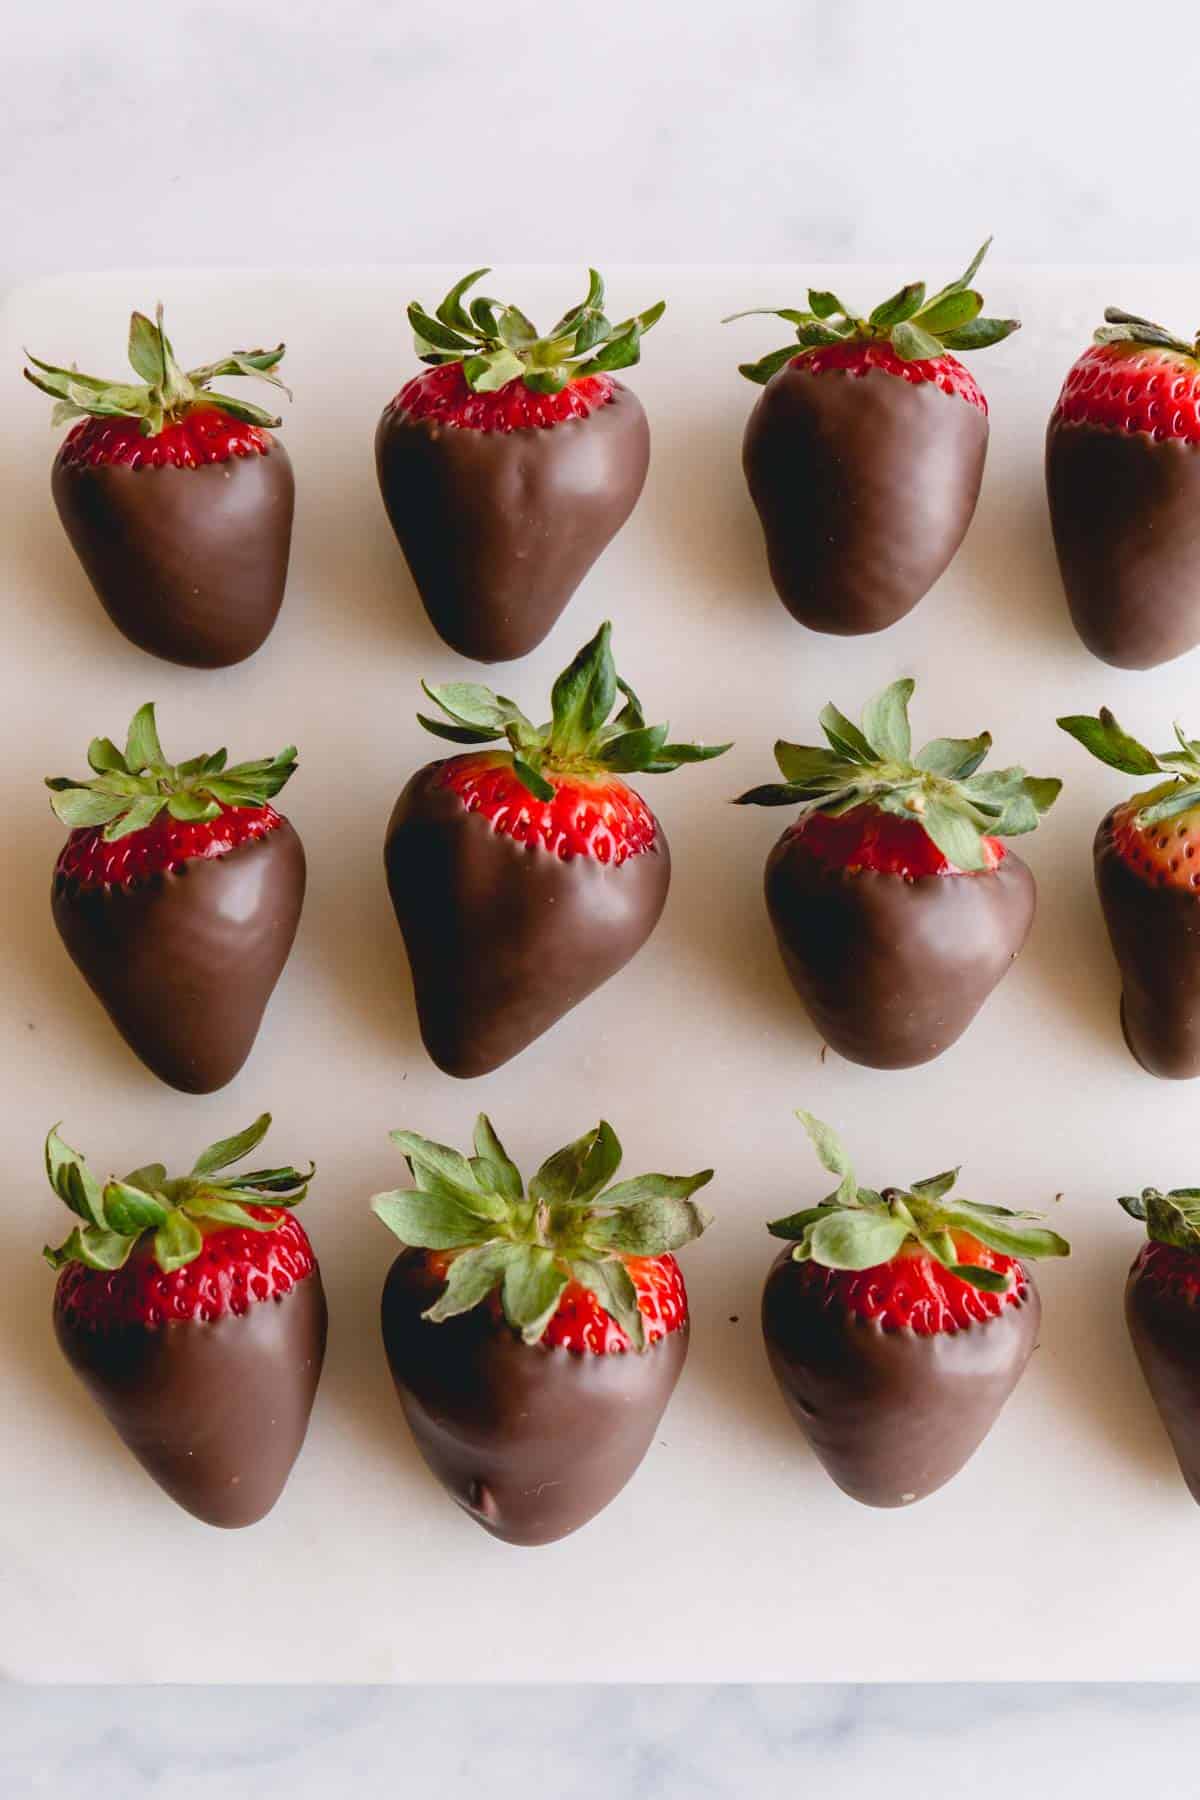 Three rows of chocolate covered strawberries on parchment paper.